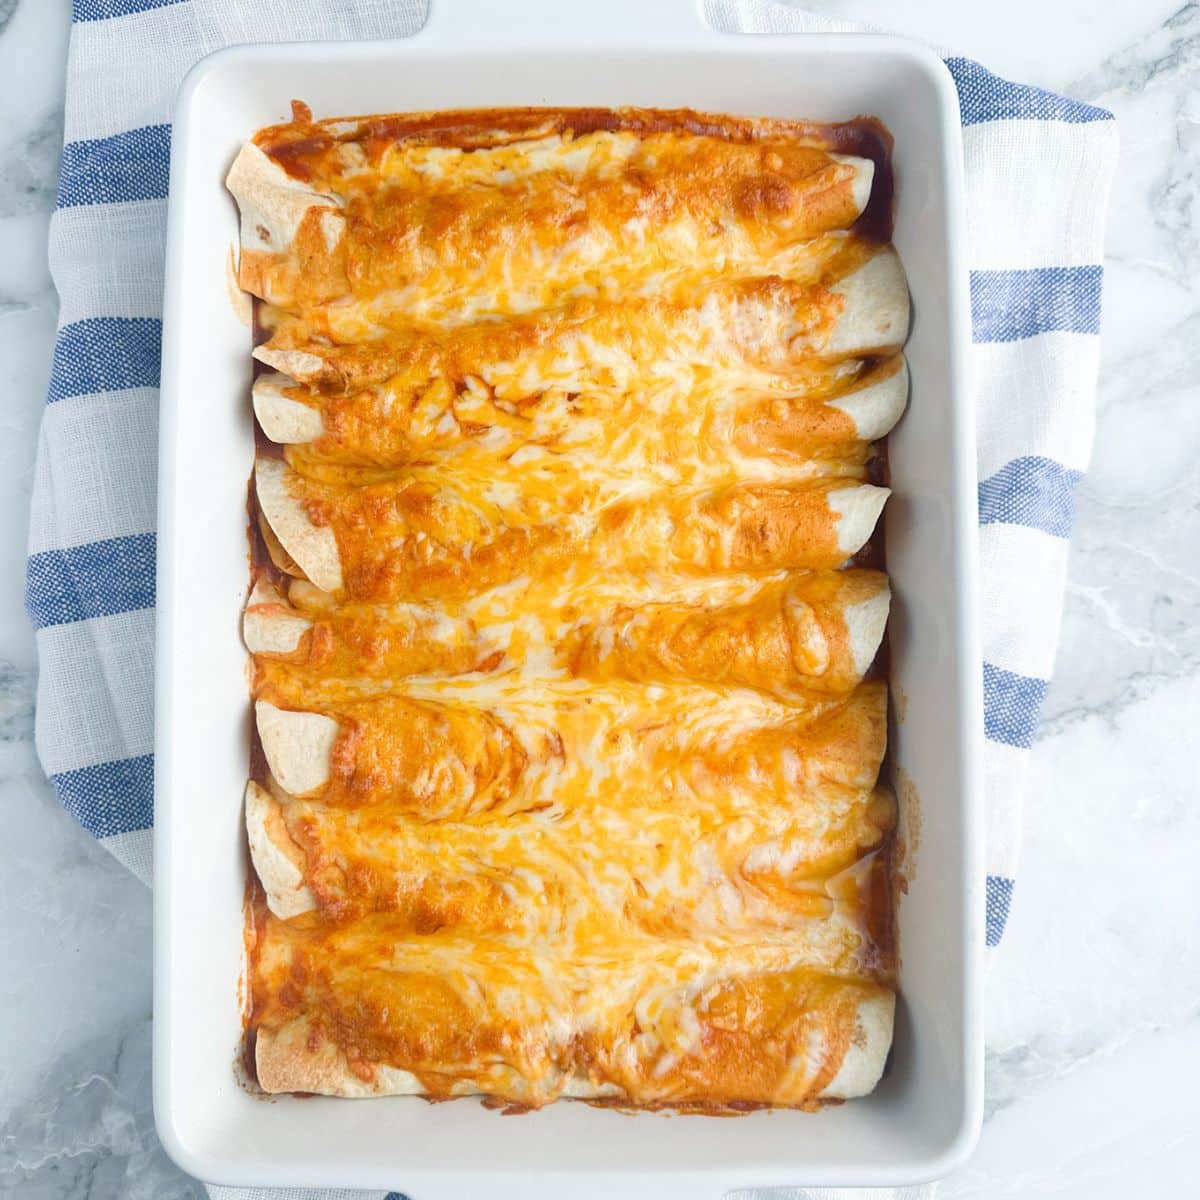 Casserole dish with cooked enchiladas.